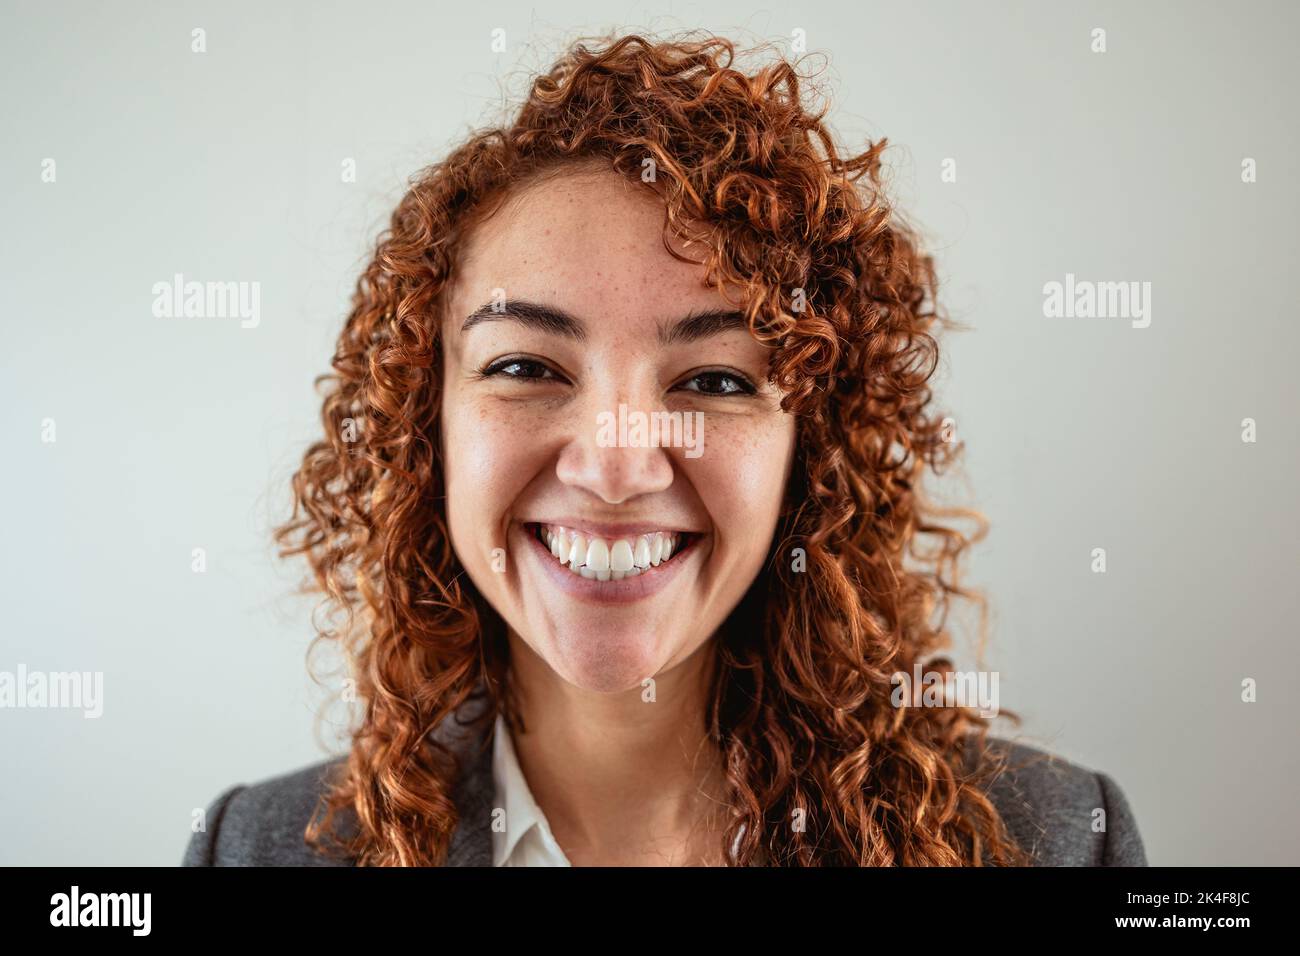 Business woman having fun looking in front of camera inside office Stock Photo